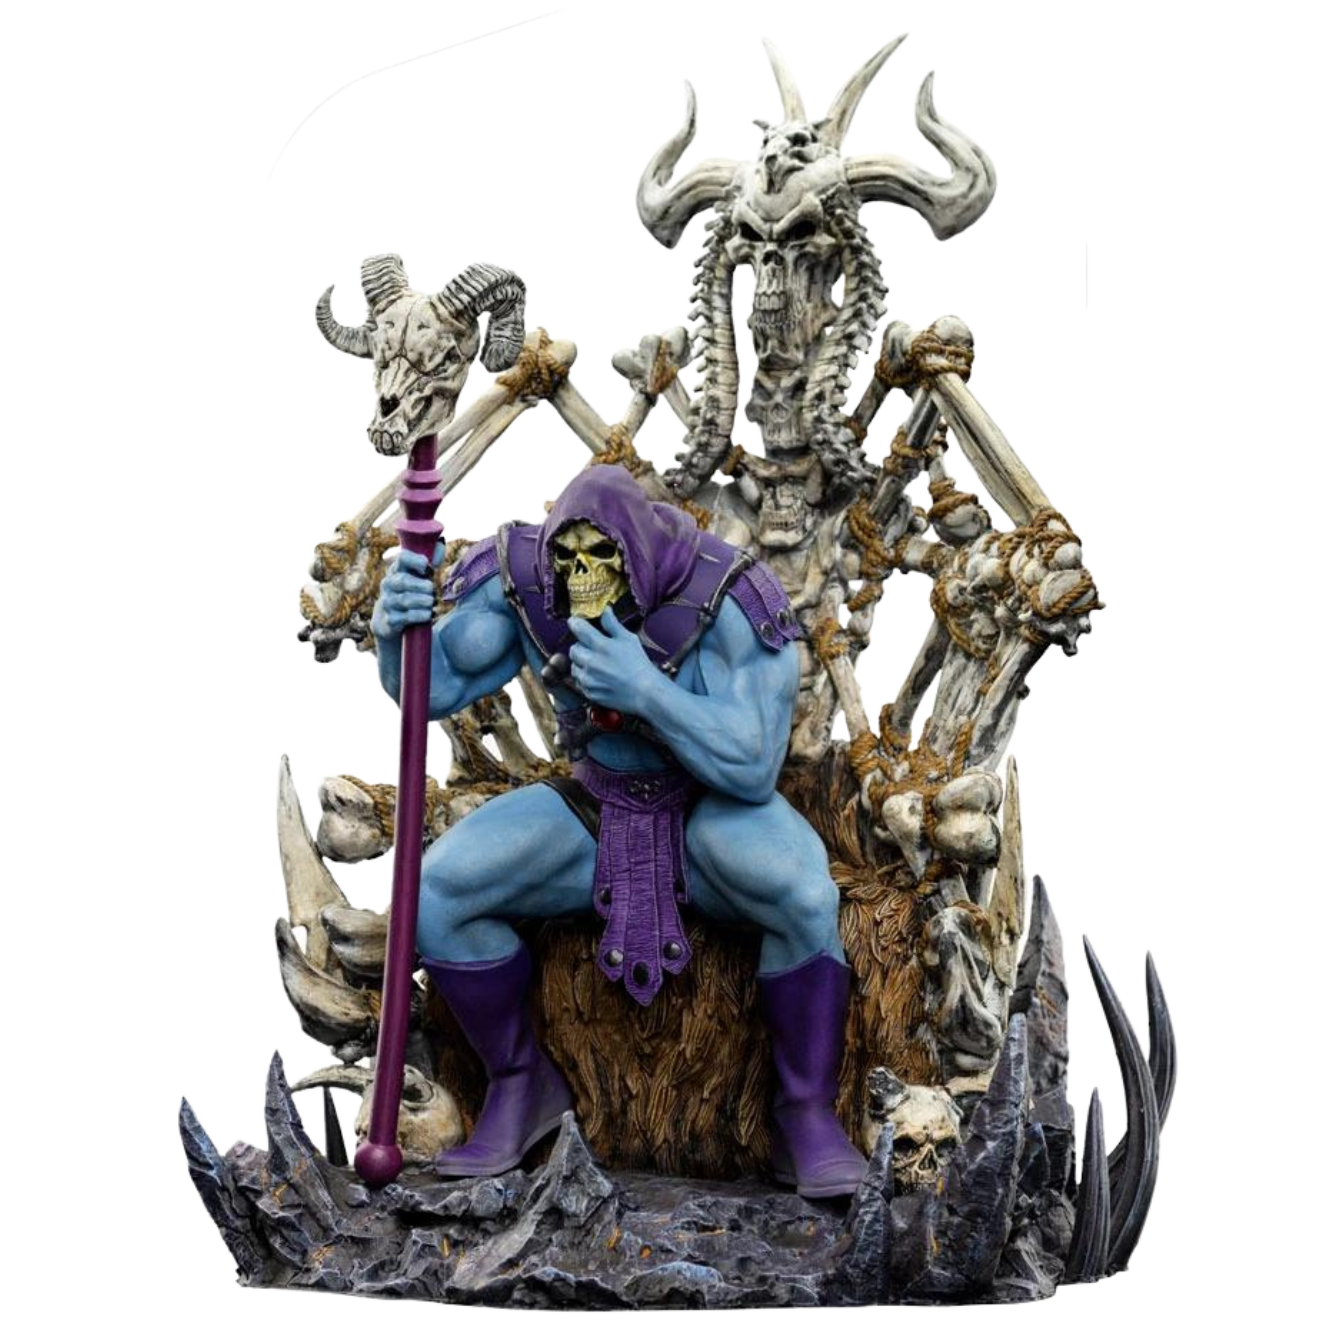 SKELETOR ON THRONE DELUXE 1:10 Scale Statue by Iron Studios